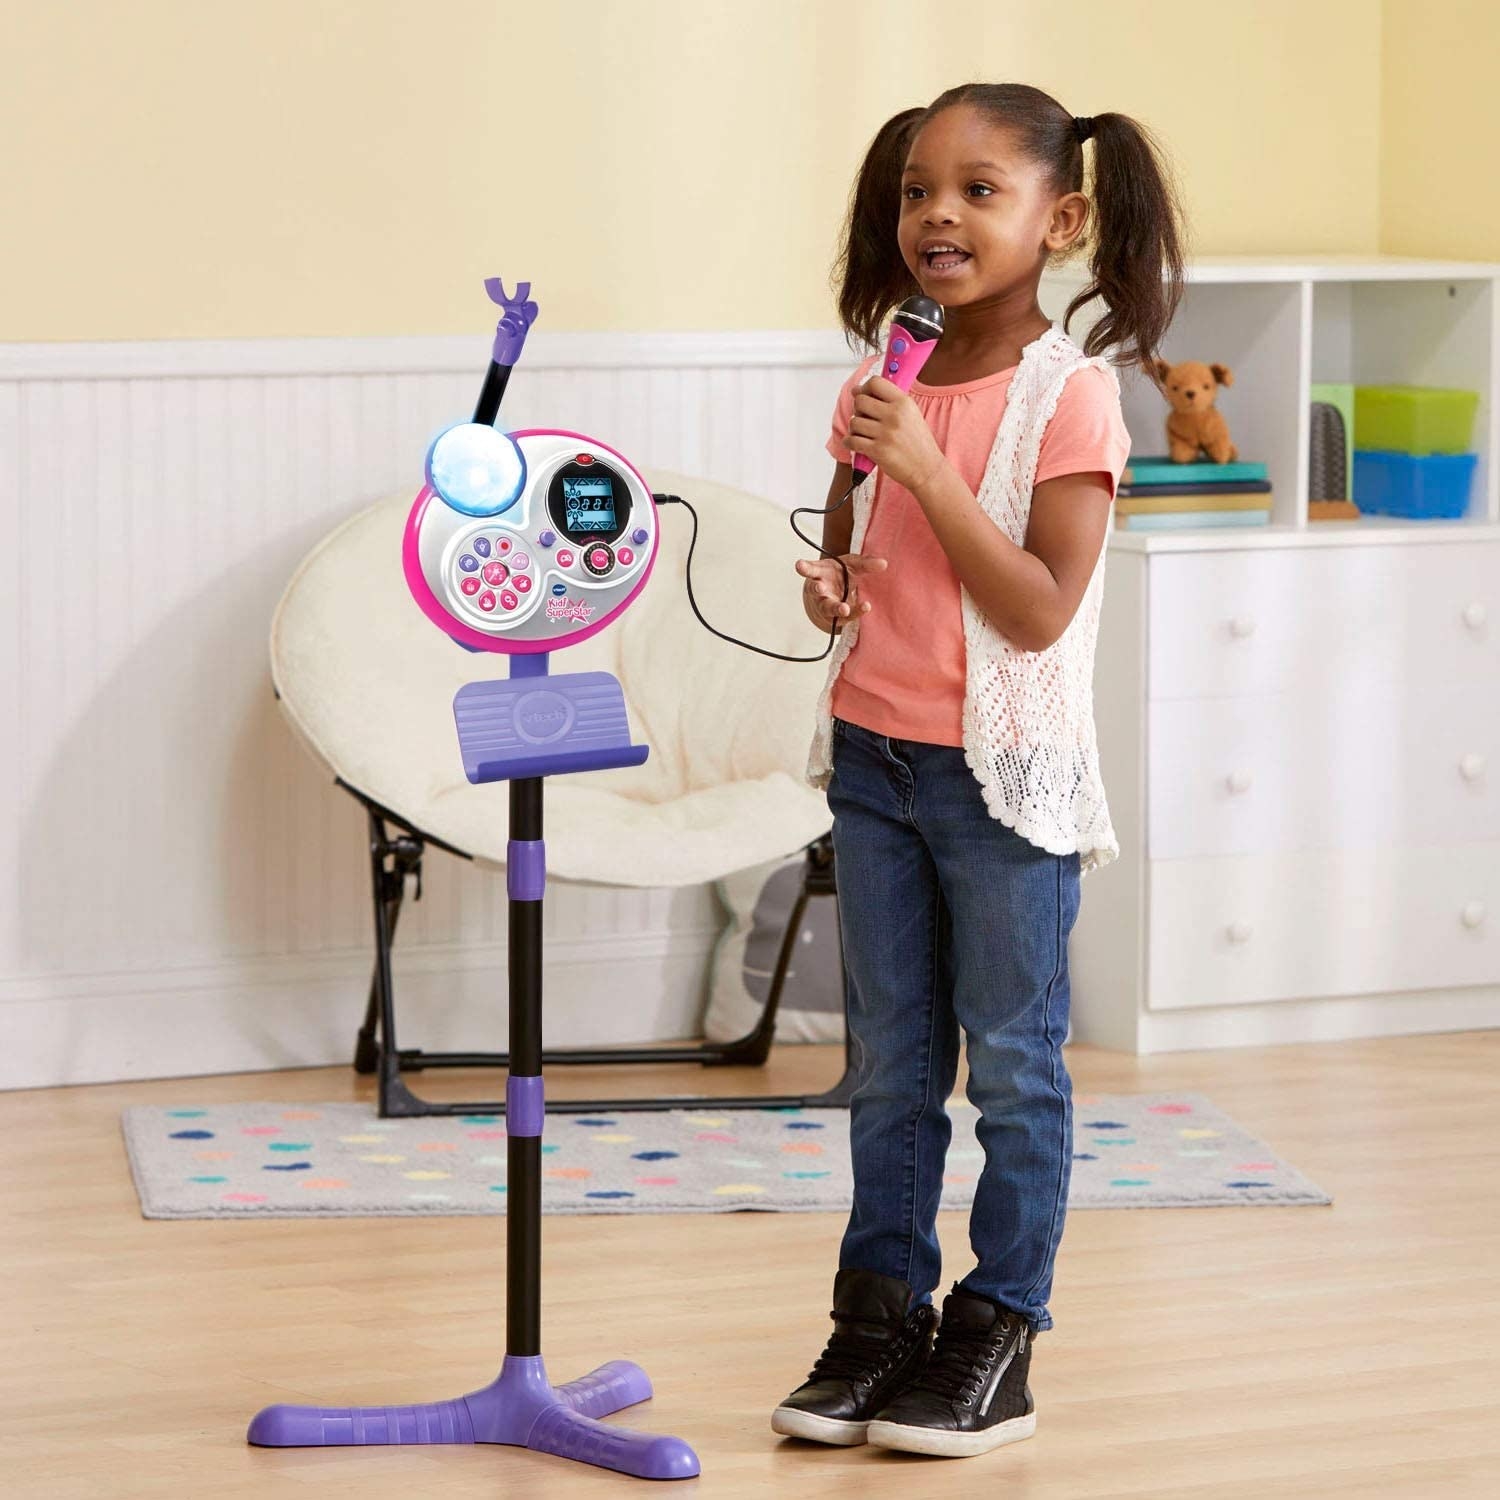 A young girl sings into a handheld microphone and karaoke set